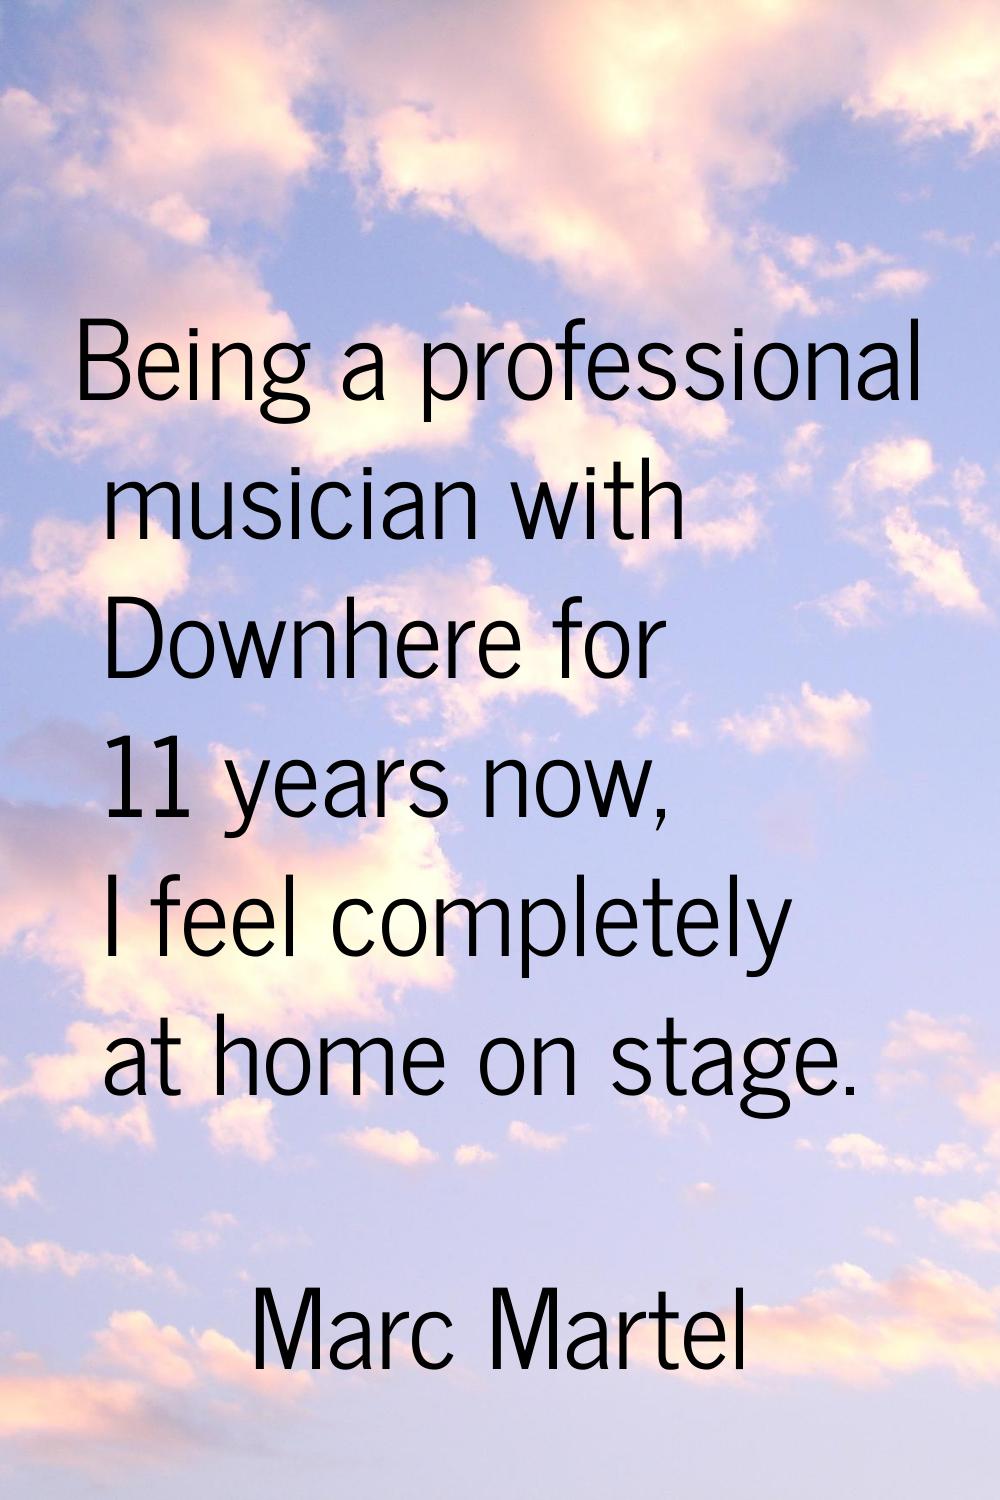 Being a professional musician with Downhere for 11 years now, I feel completely at home on stage.